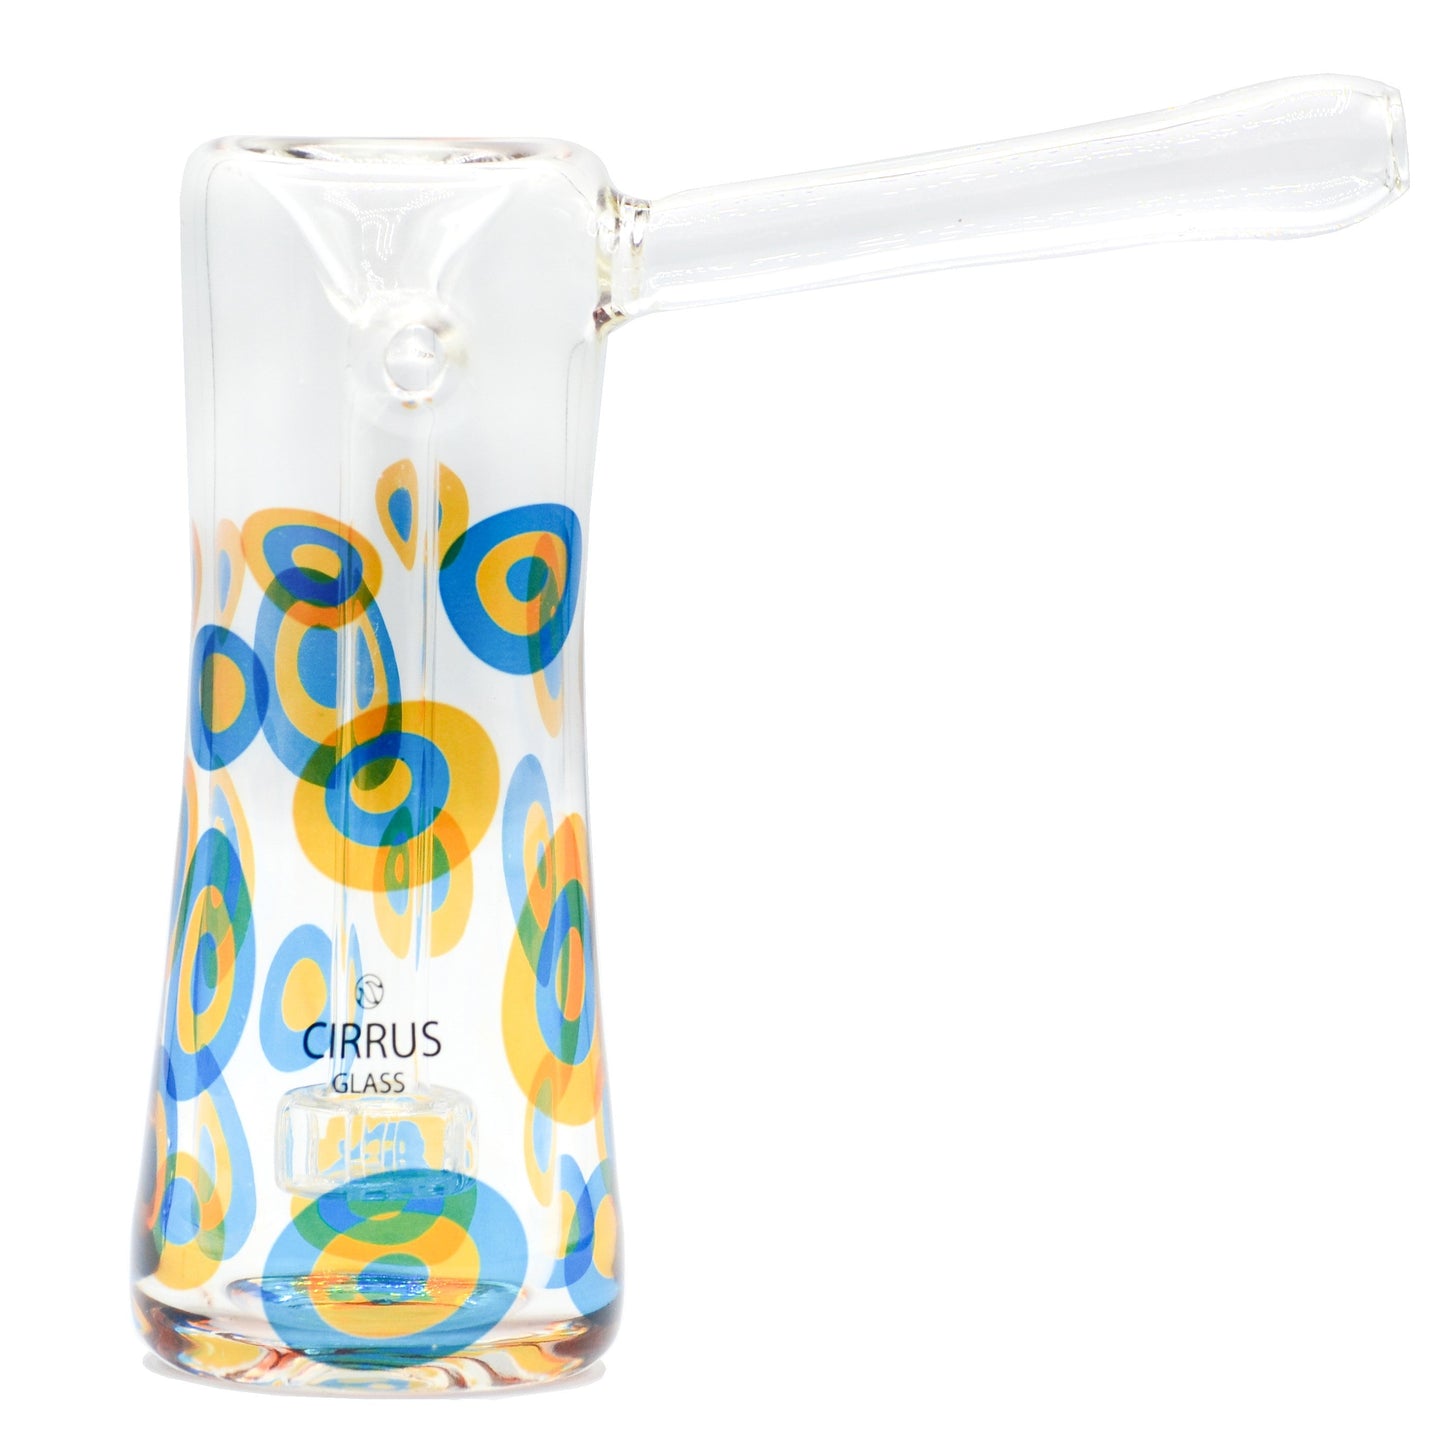 Cirrus Glass Bubbler by Cirrus Glass | Mission Dispensary